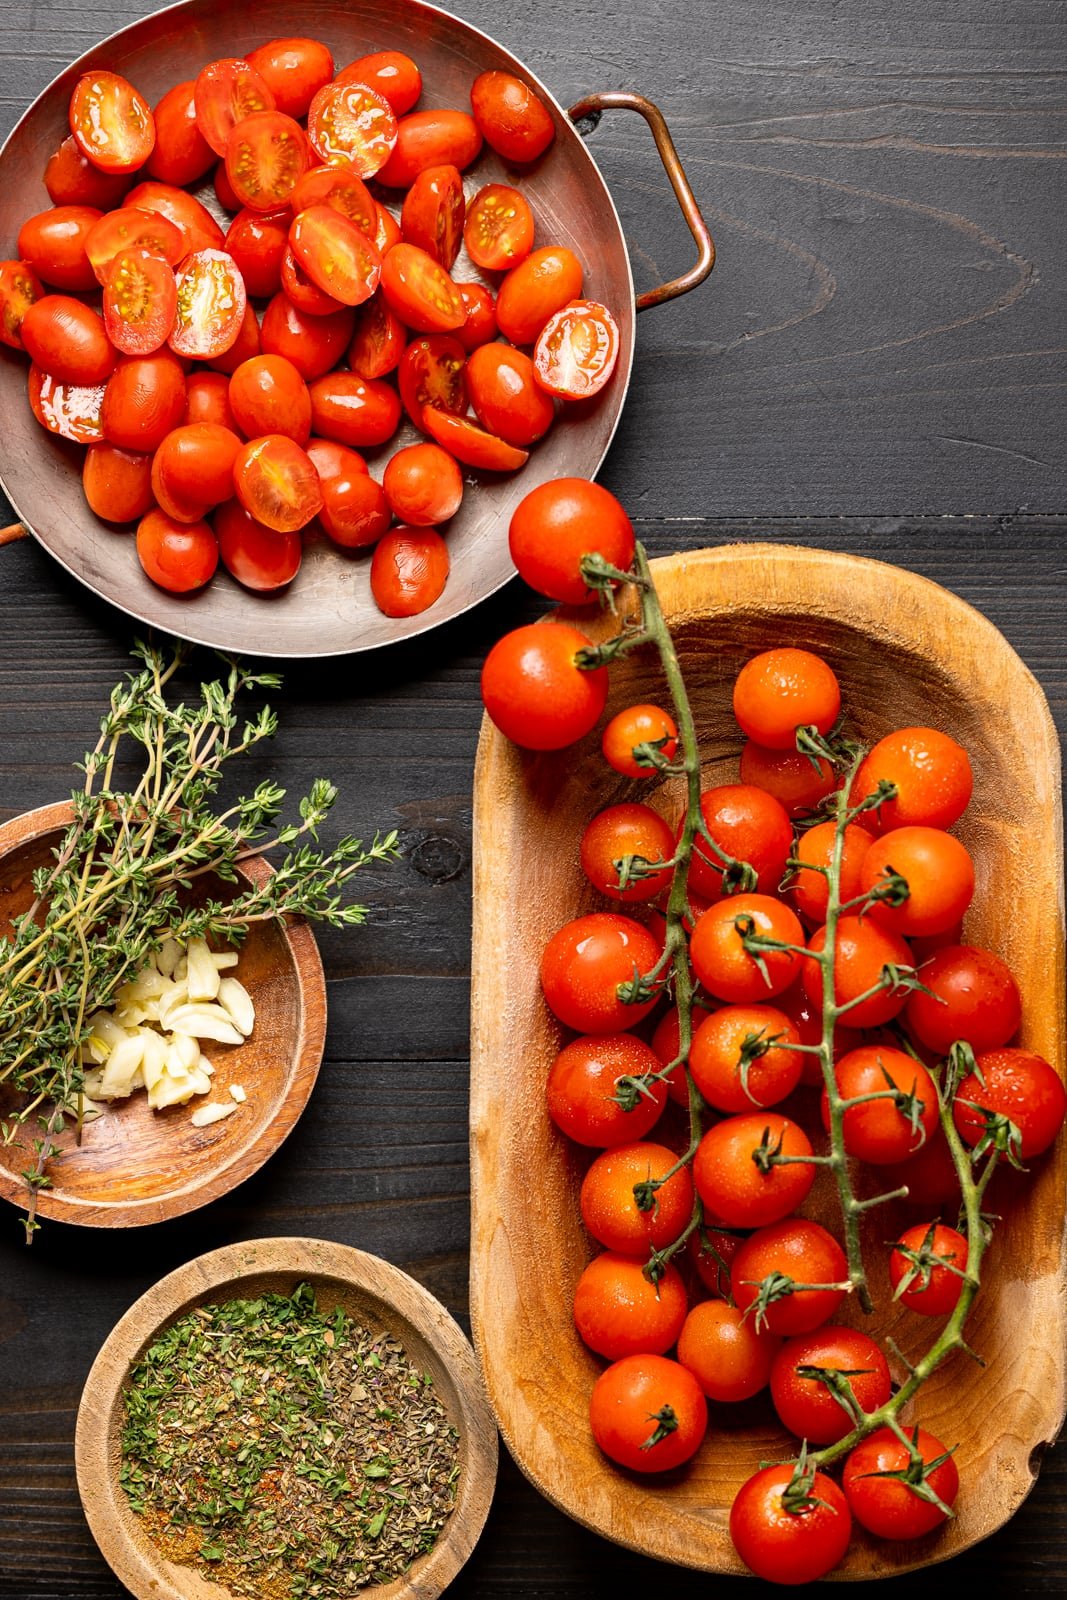 Two kinds of tomatoes in bowls on a black wood table along with herbs + seasonings.